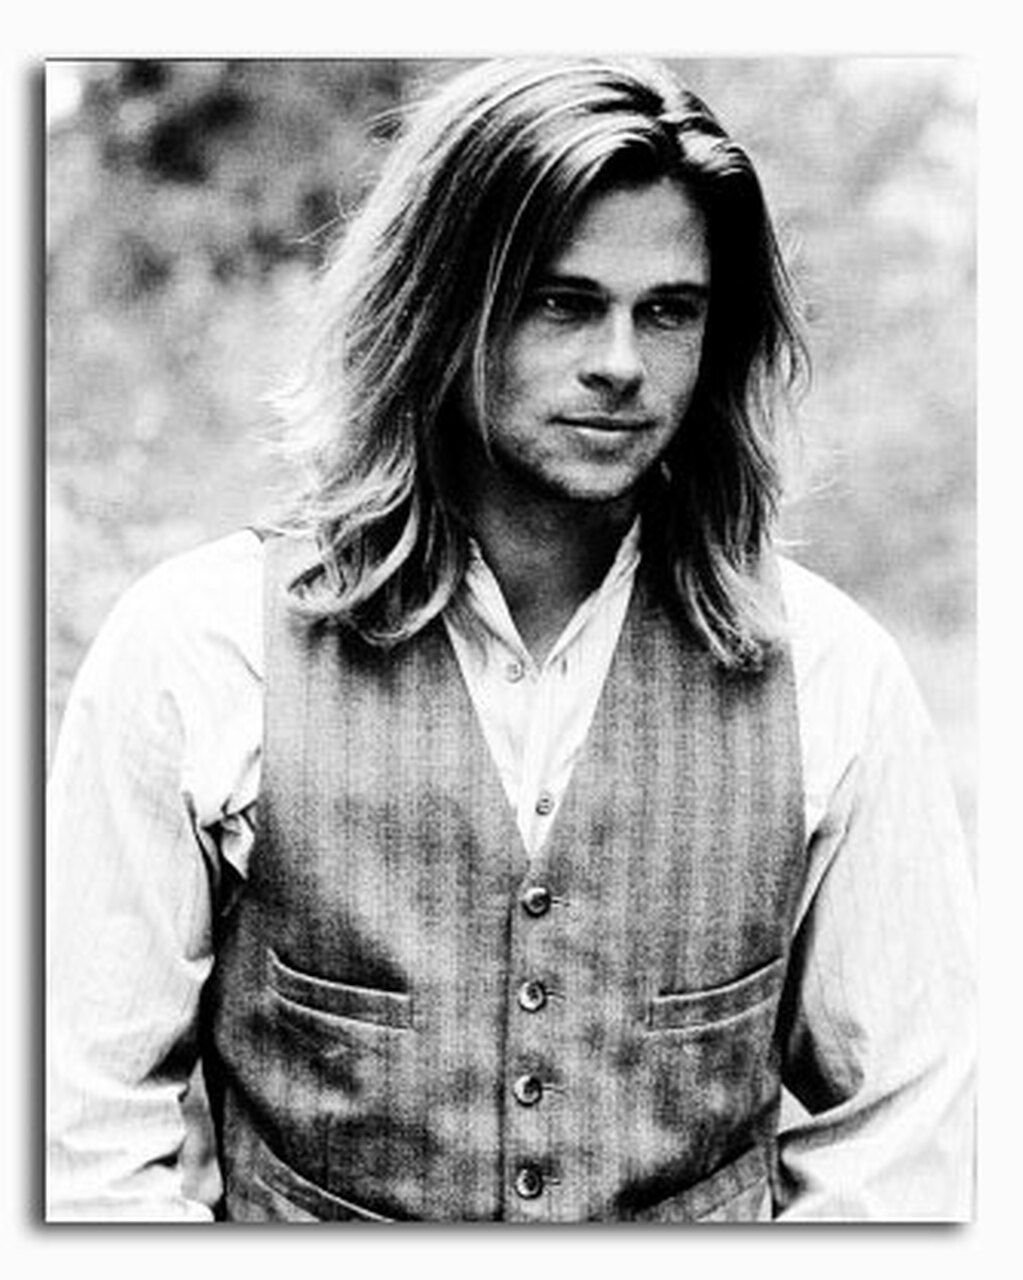 SS2124967) Movie picture of Brad Pitt buy celebrity photo and posters at Starstills.com